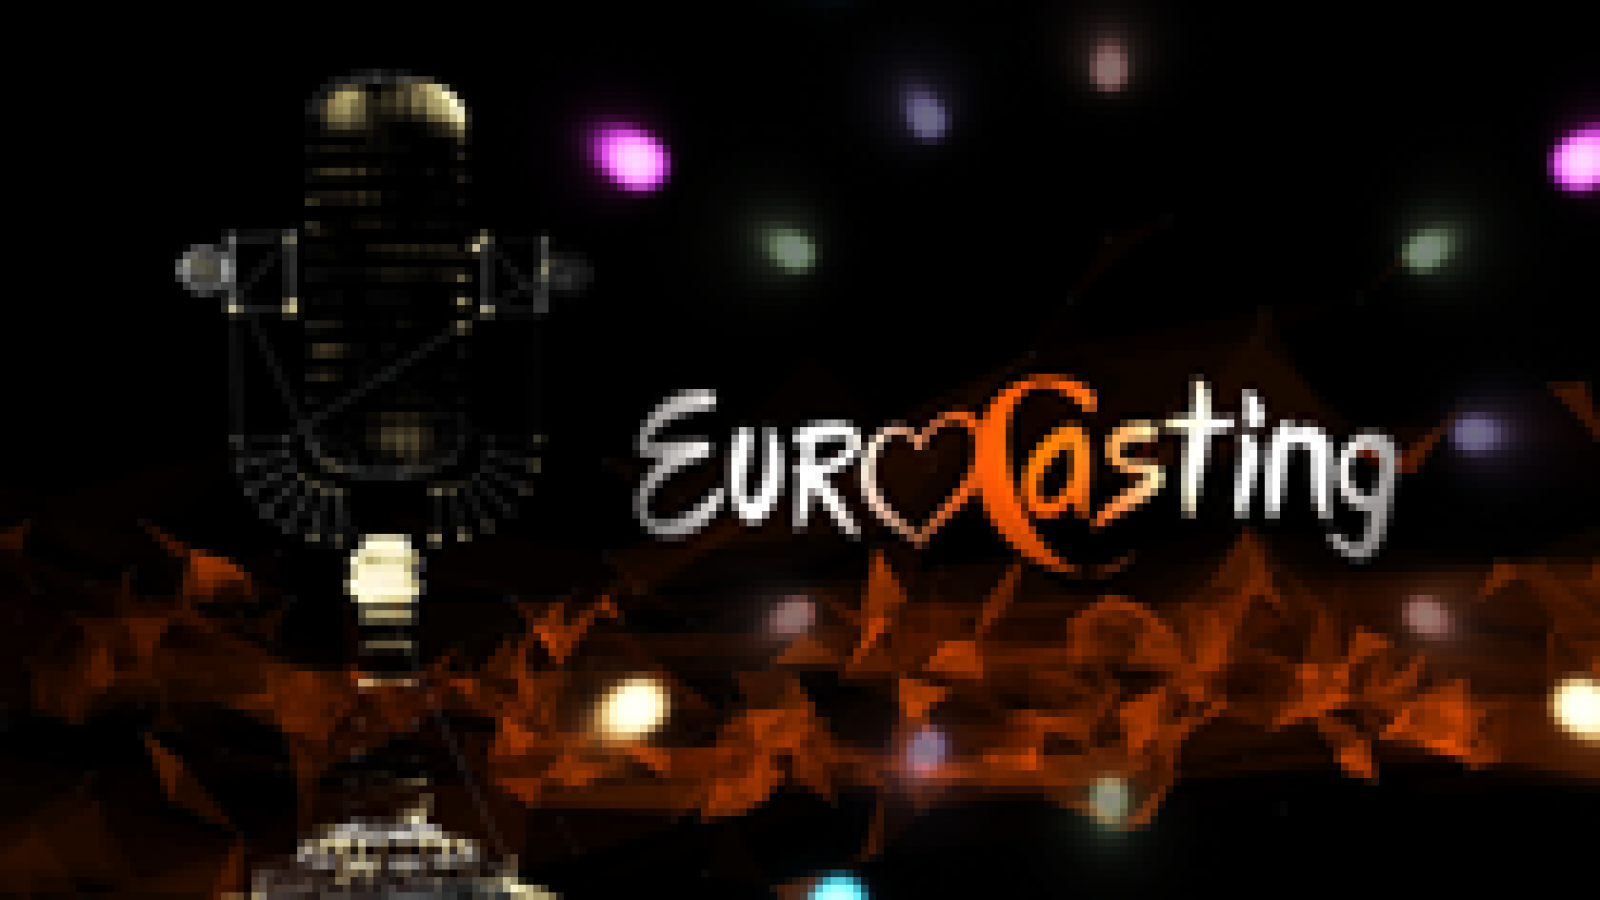 All about Eurocasting